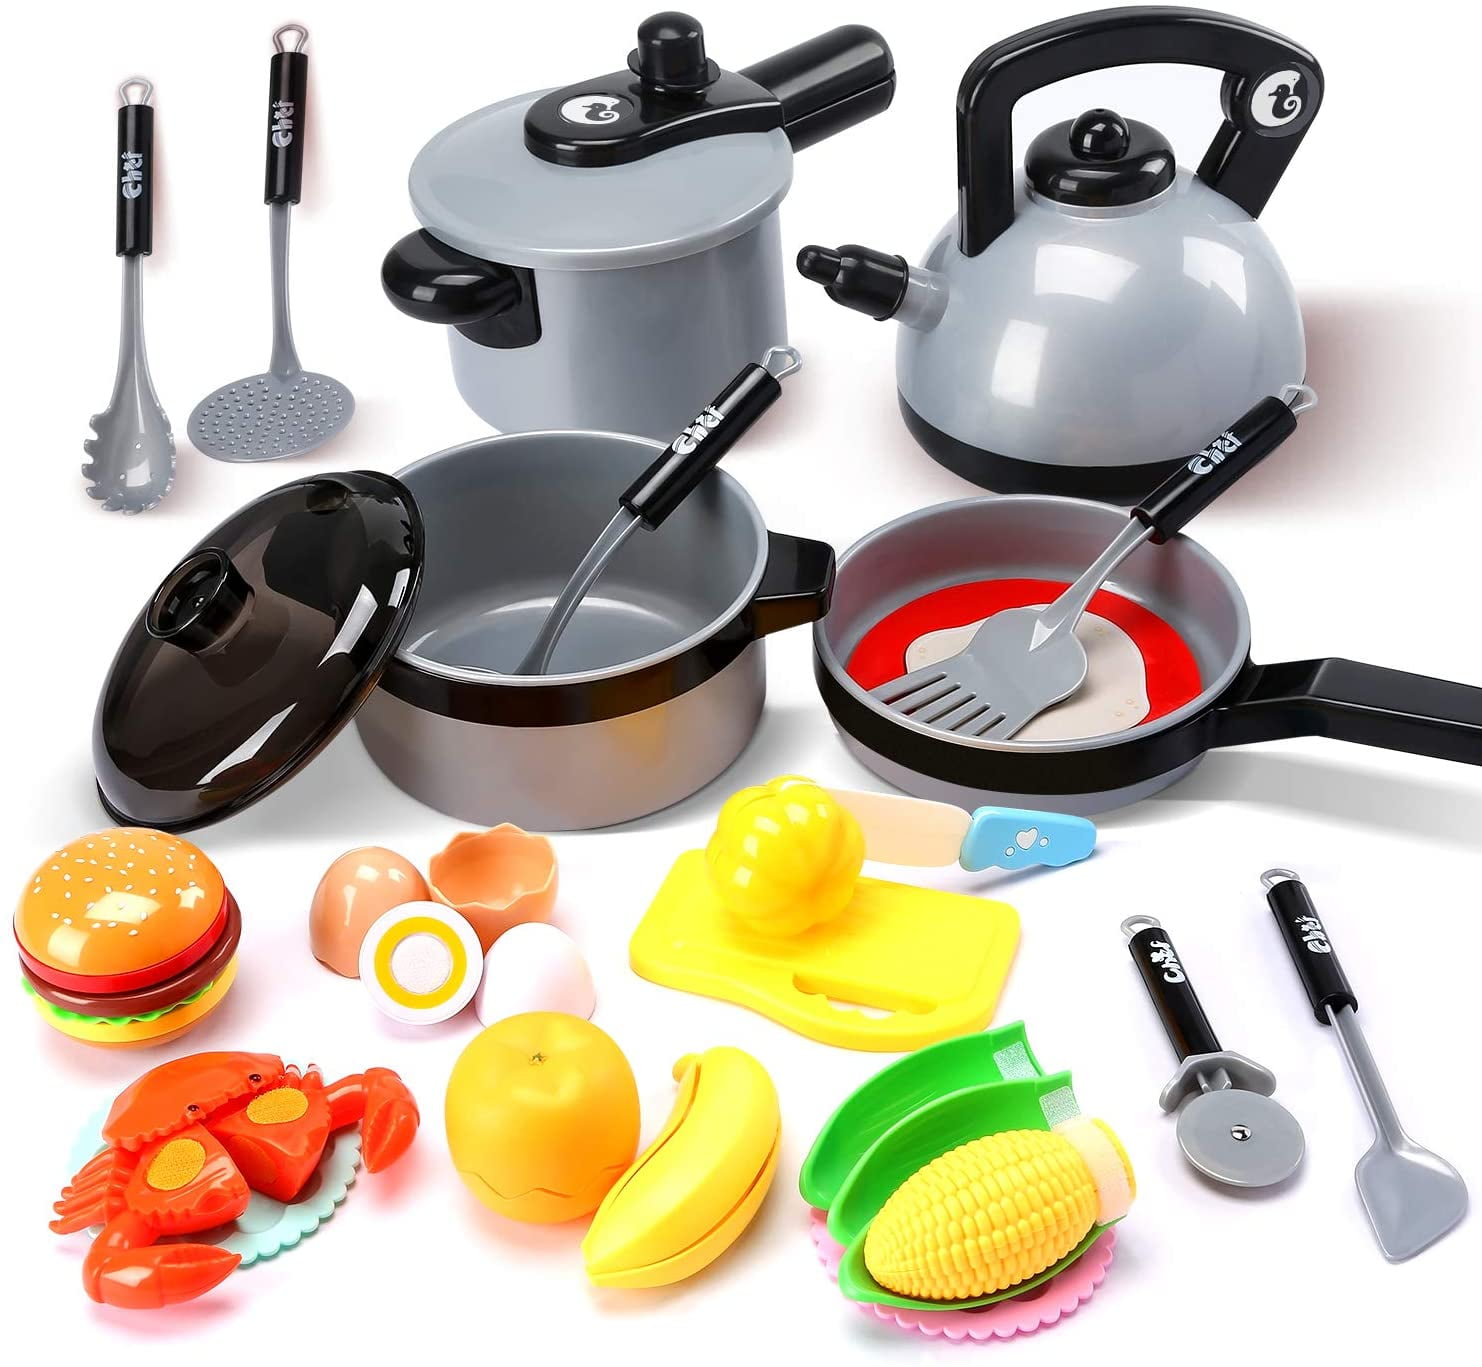 Kitchen Food Cooking Role Play Pretend Toy Cookware For Children Blue 11pcs 